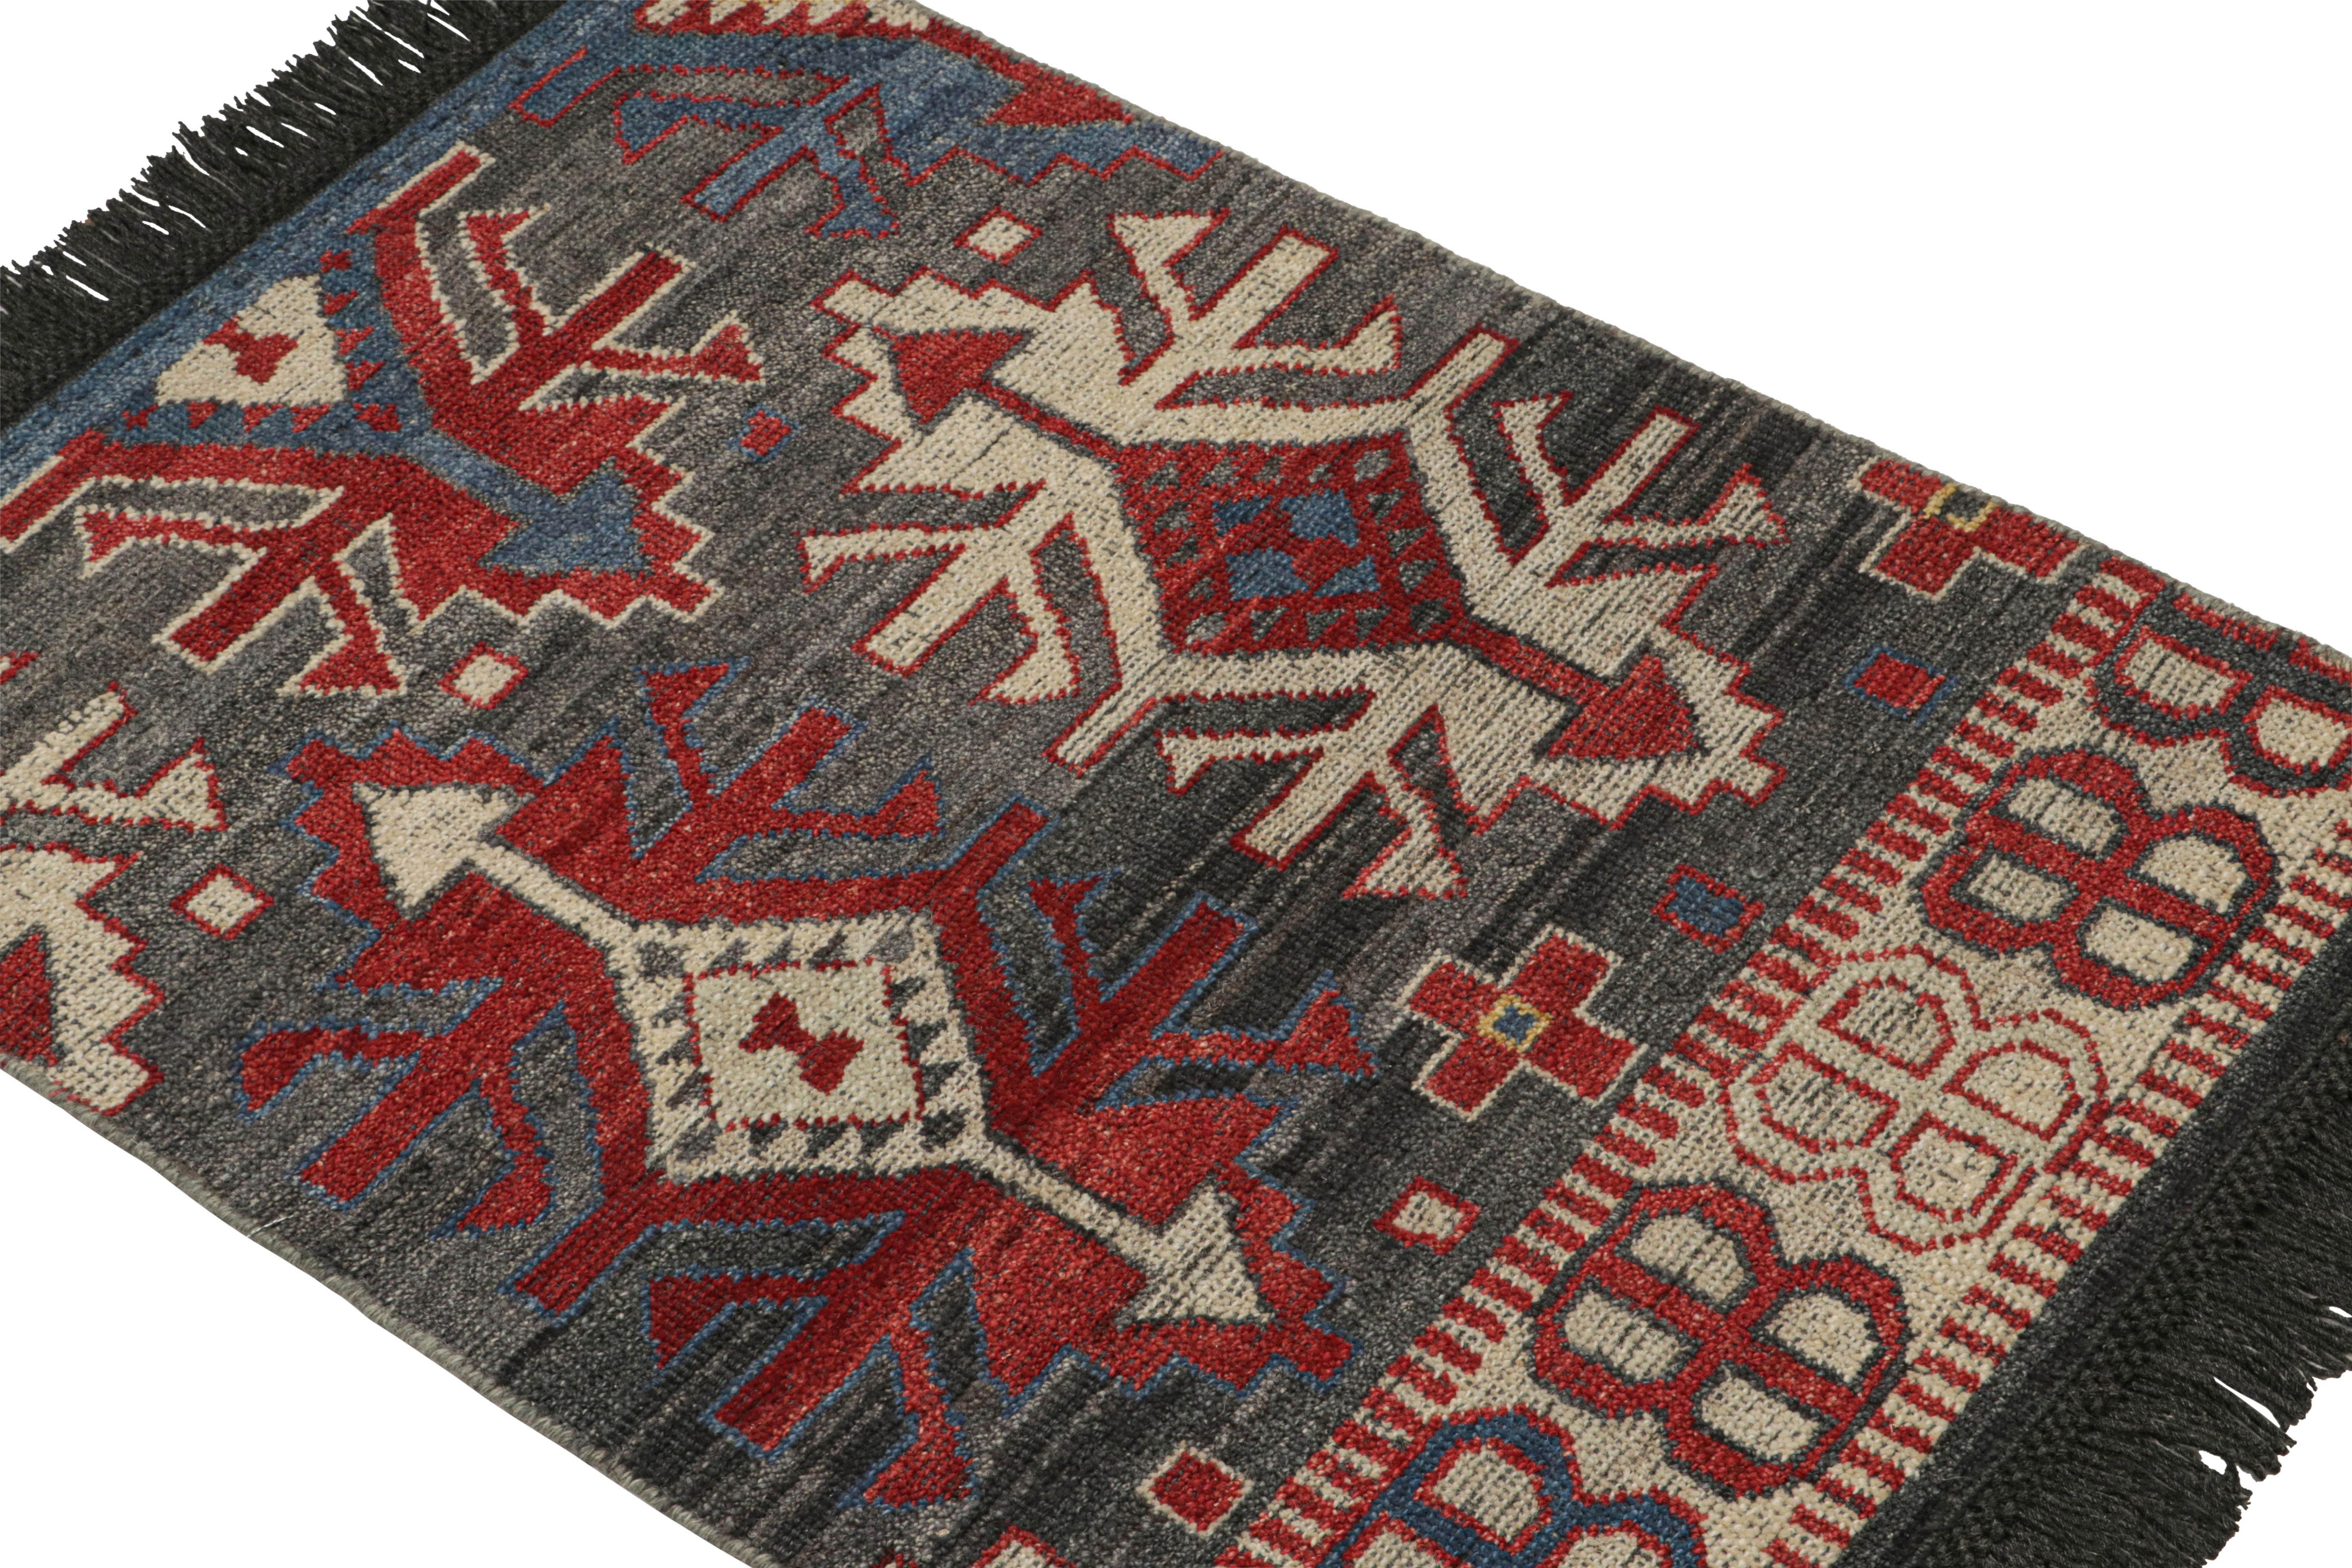 As Inspired by tribal and Caucasian rugs, this 2x3 modern architectural rug from our Burano collection is hand knotted in wool.

On the Design: 

Connoisseurs will admire that this design has been inspired by antique tribal rugs of Caucasian